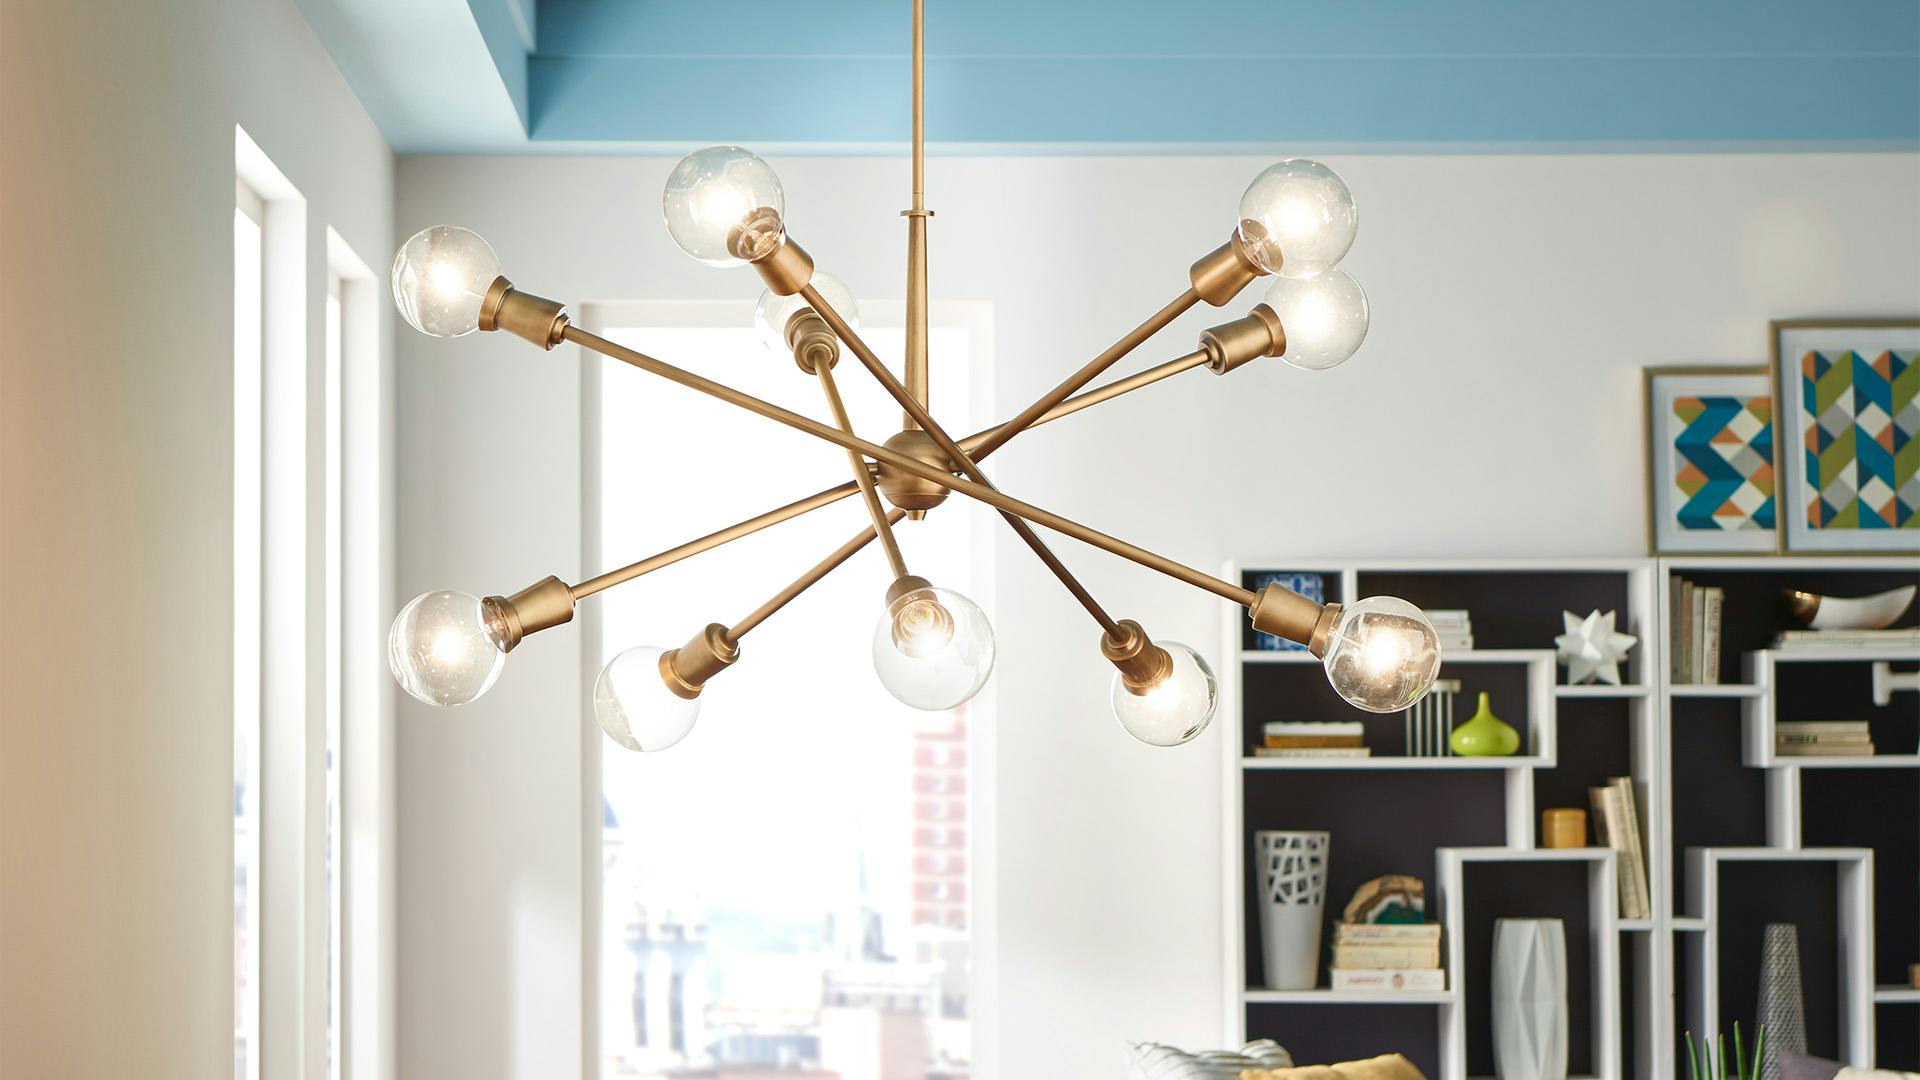 Armstrong 10-light chandelier with natural brass finish in dining room.